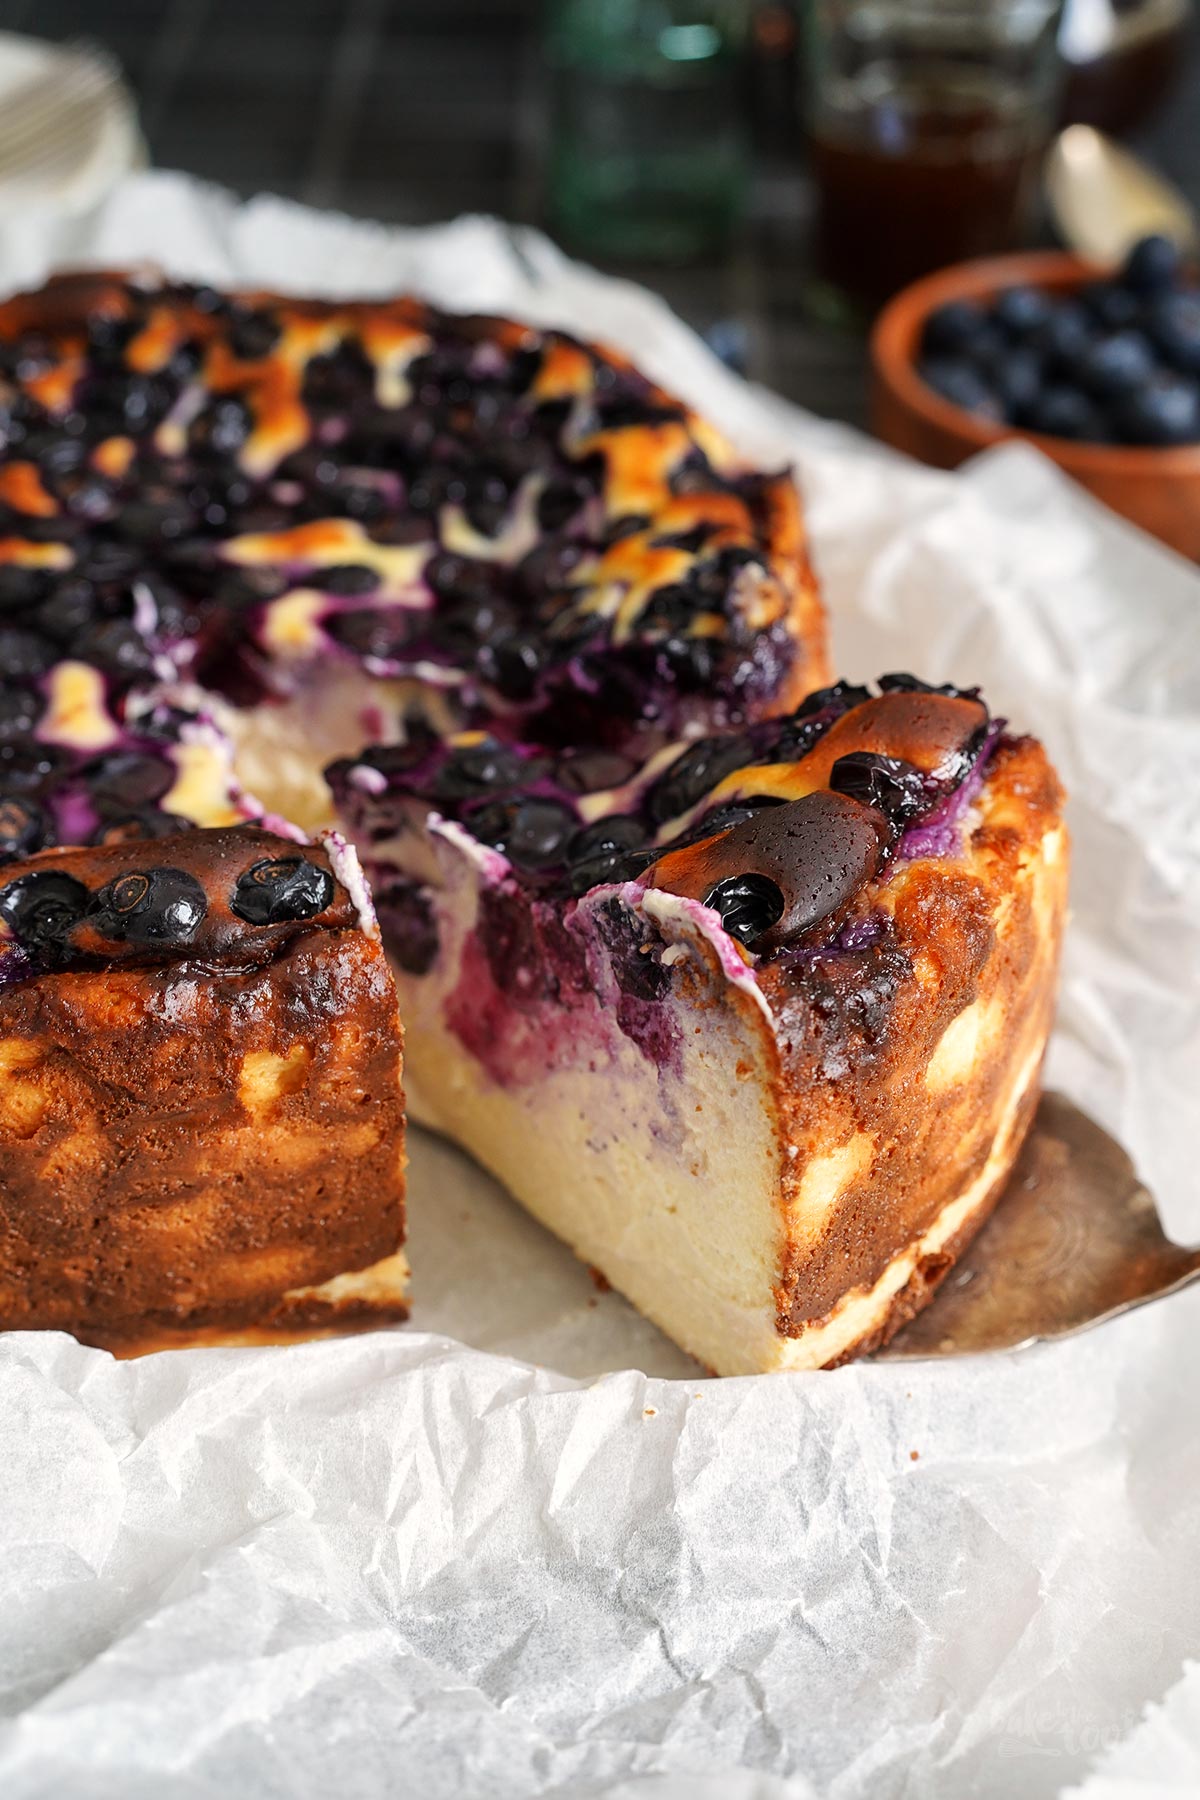 Blueberry Basque Cheesecake | Bake to the roots